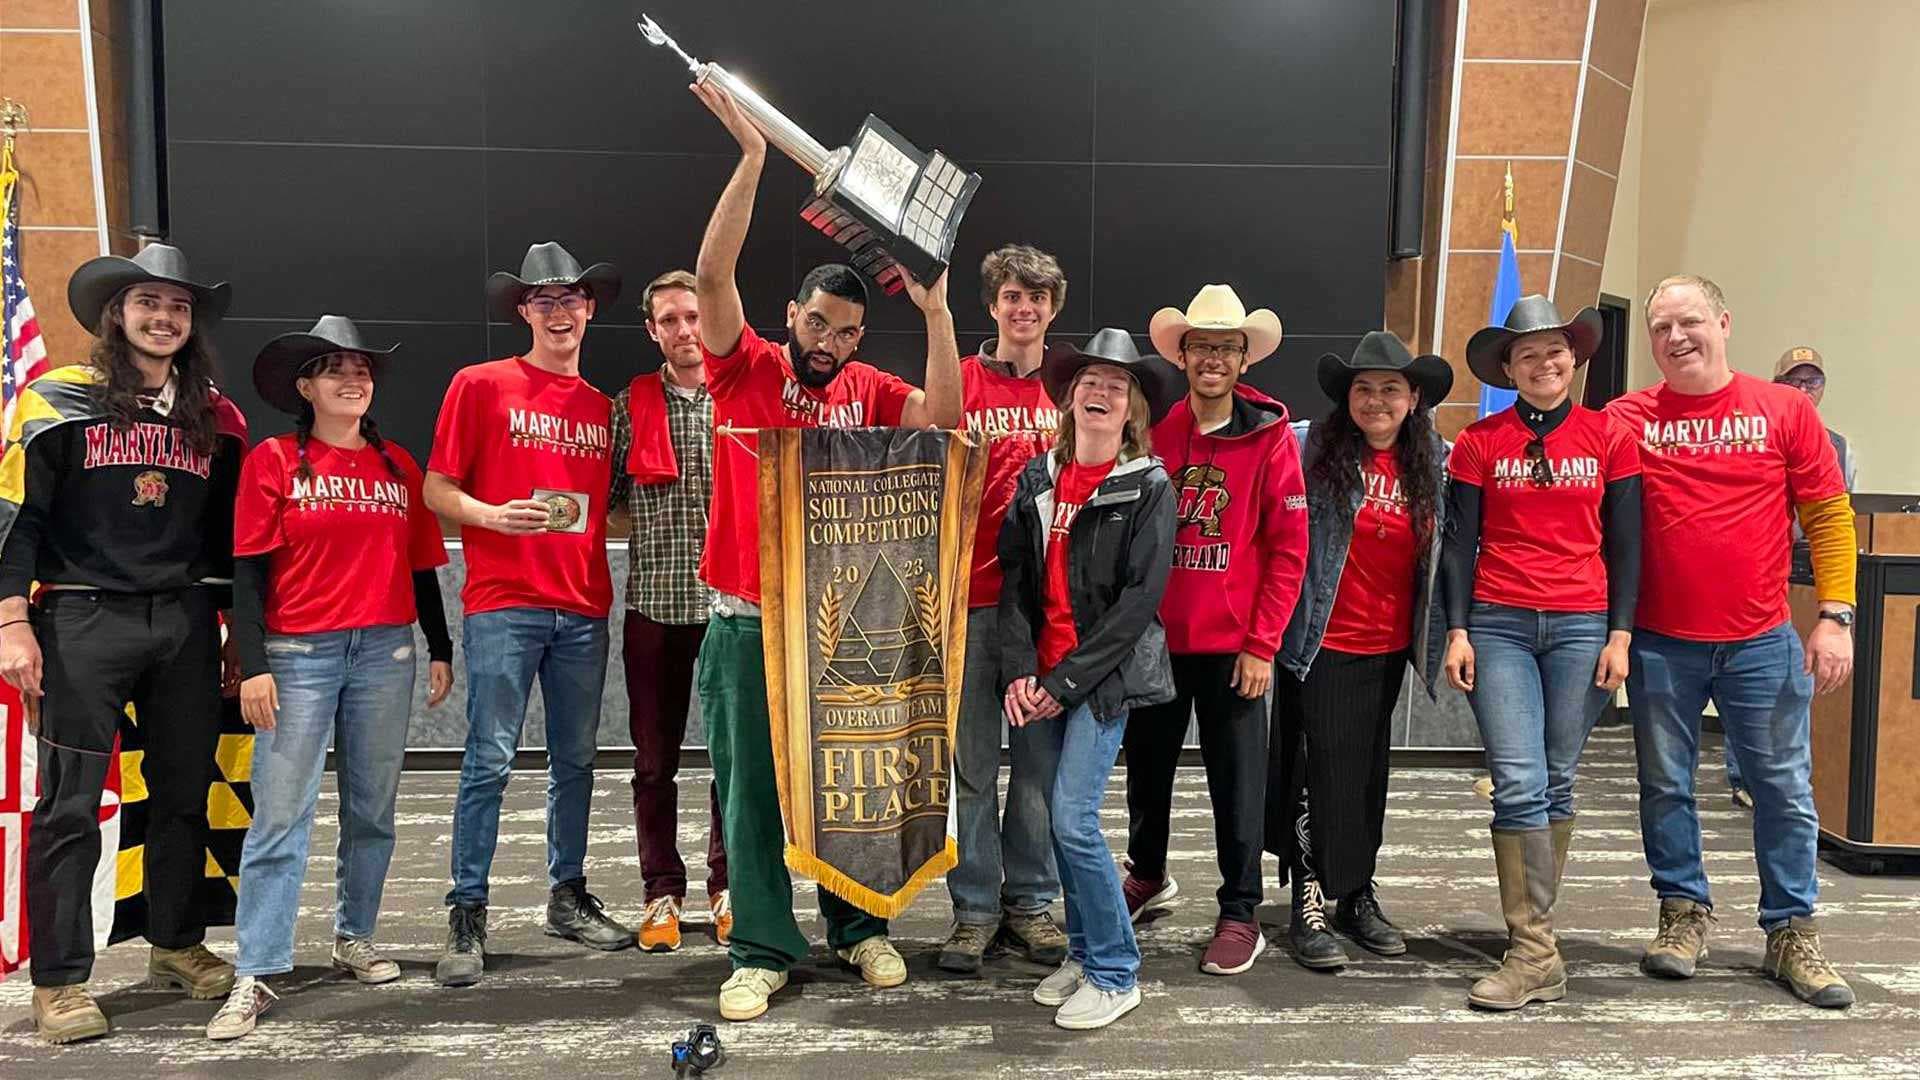 UMD soil judging team, wearing matching red Maryland T-shirts, hoists trophy